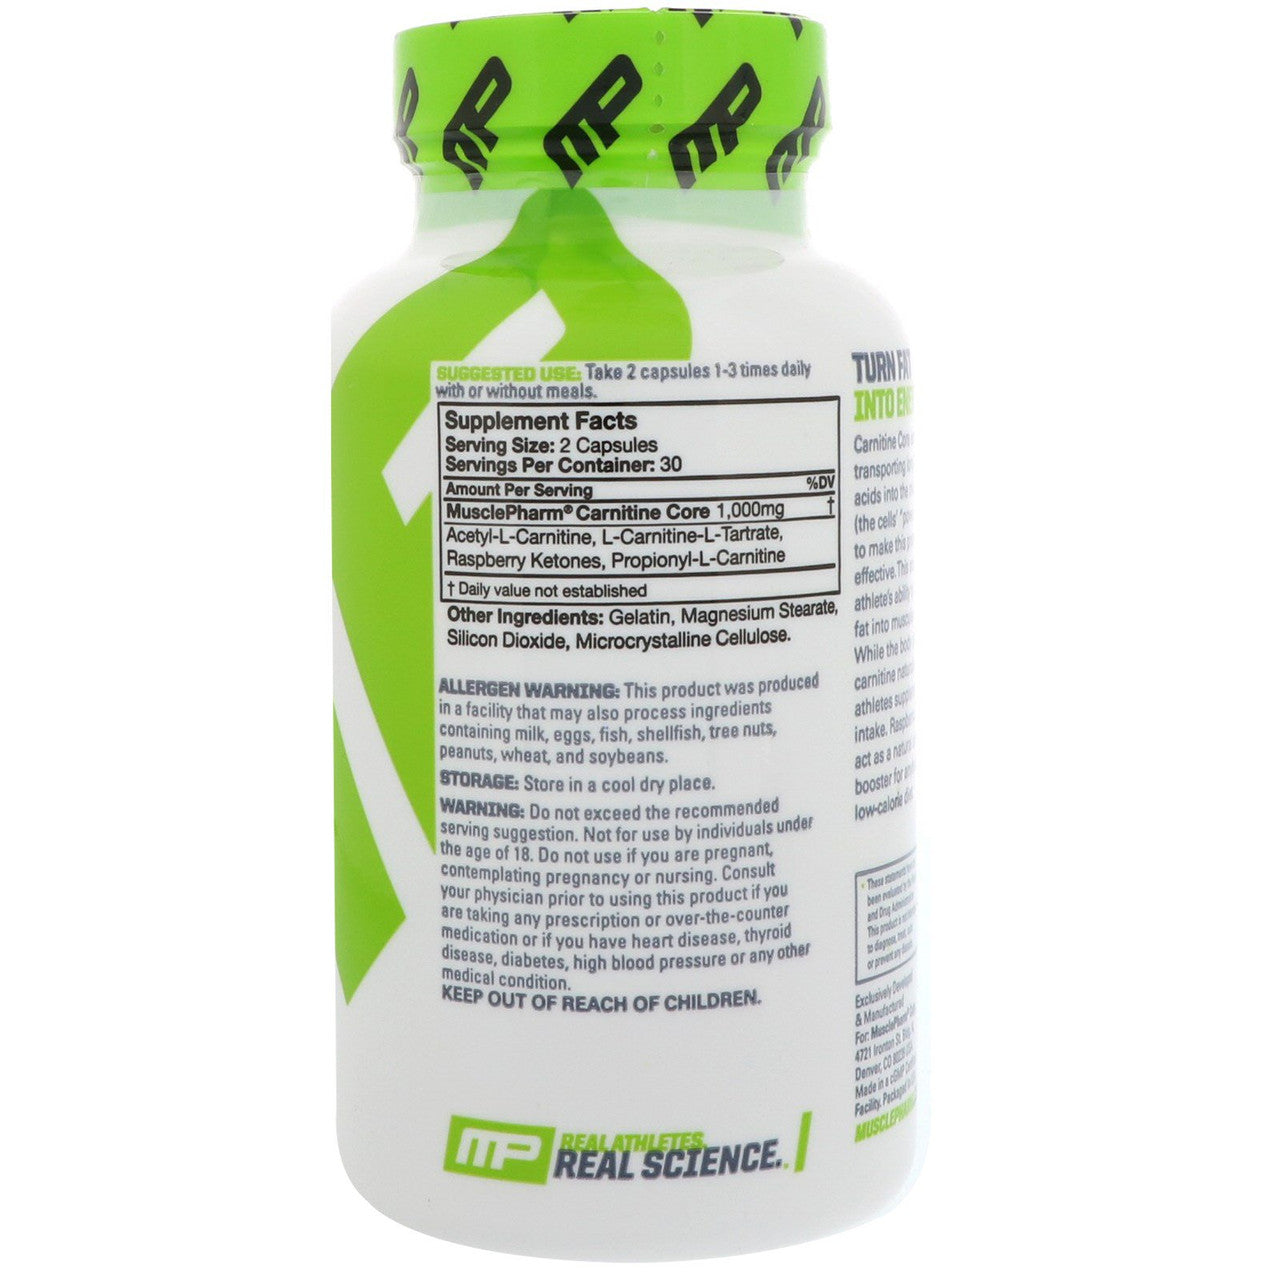 MusclePharm Carnitine Core Supplement Facts